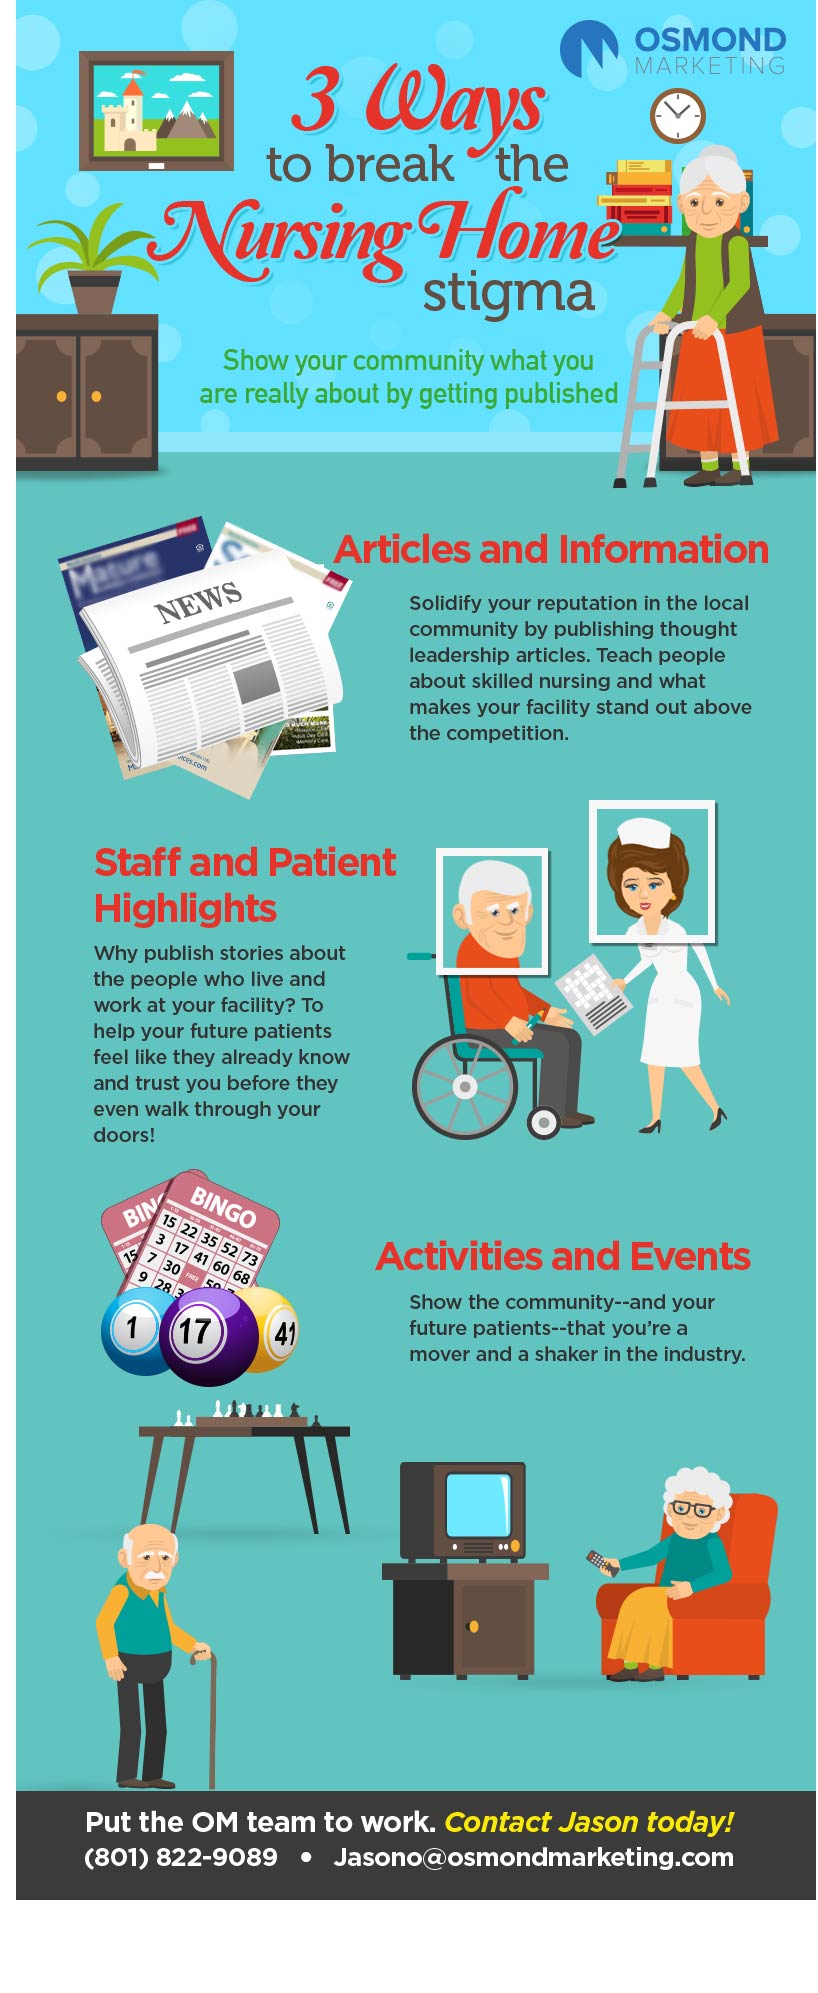 Simple steps for making a nursing home experience positive, from Osmond Marketing.